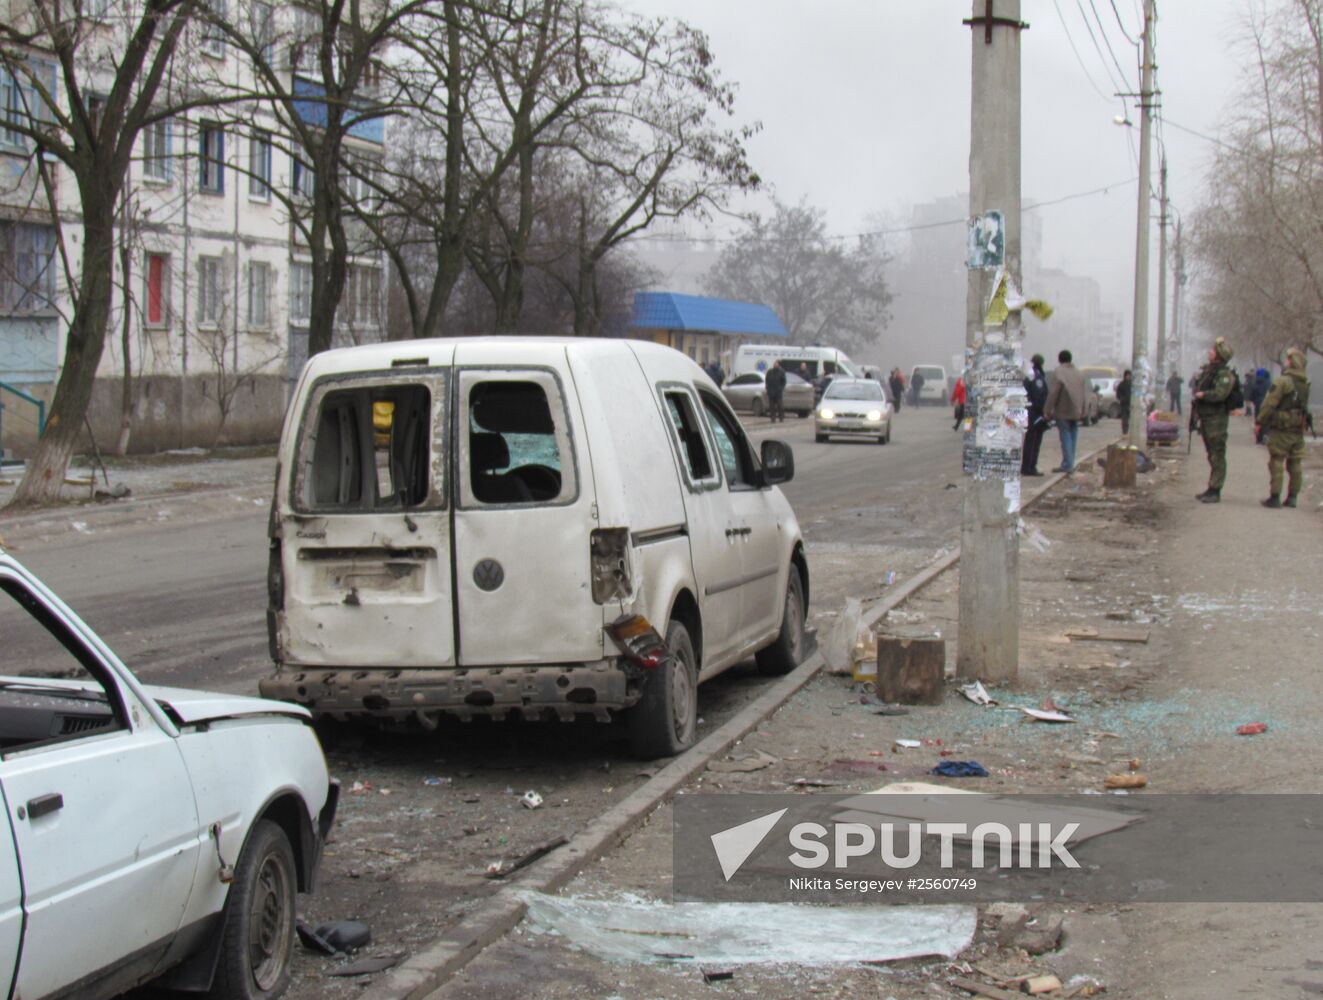 Mariupol after shelling